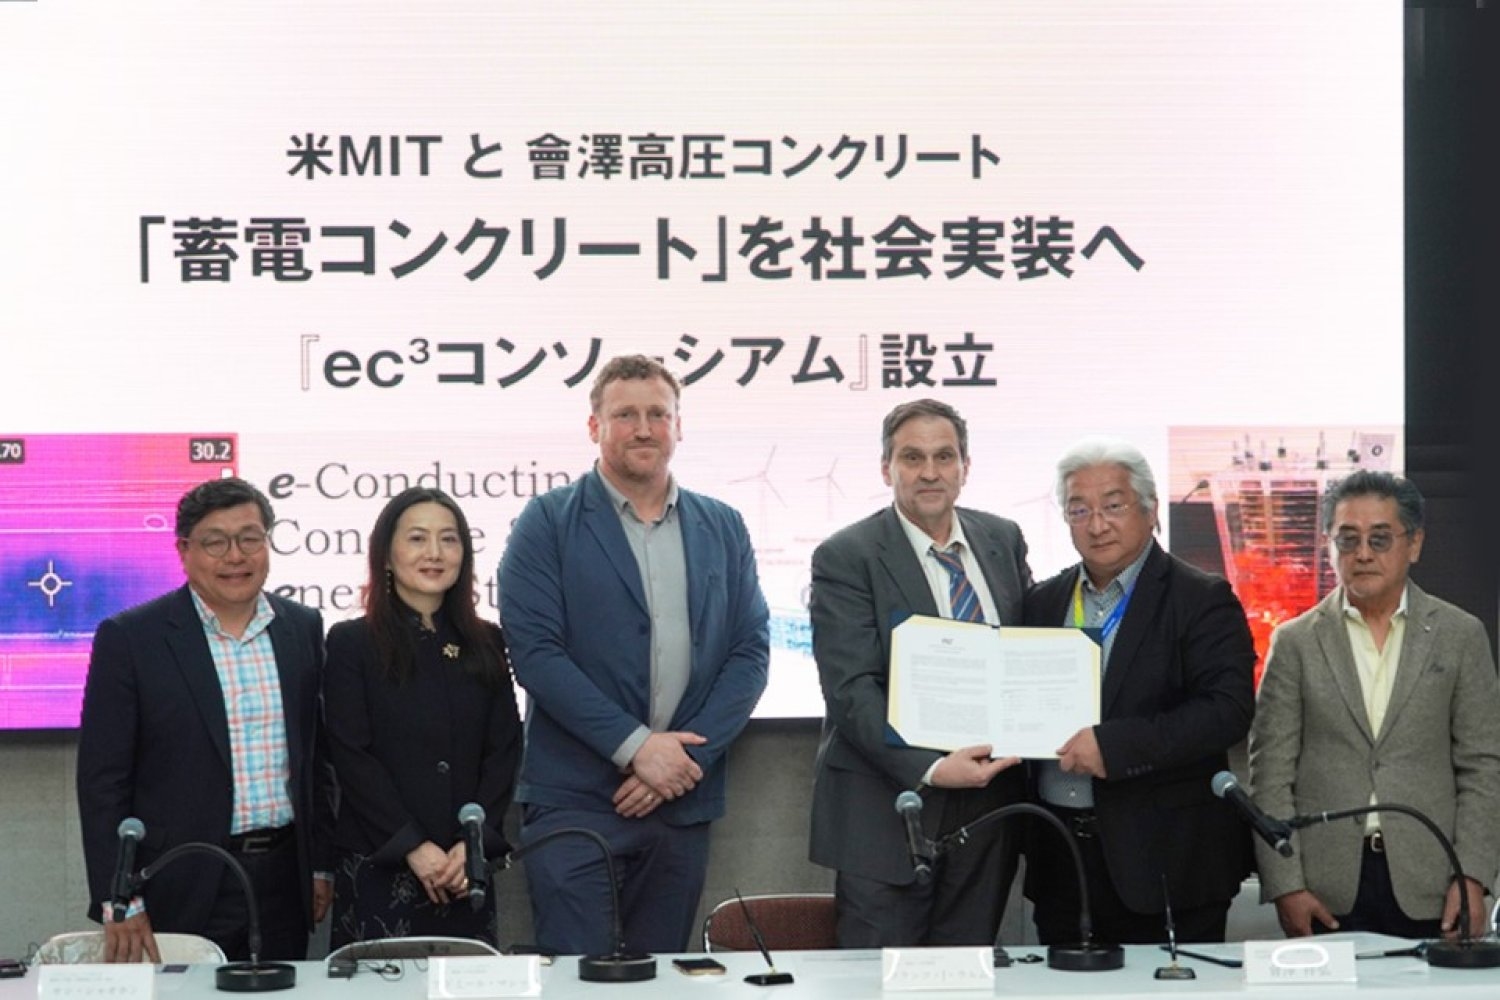 image of "MIT conductive concrete consortium cements five-year research agreement with Japanese industry"